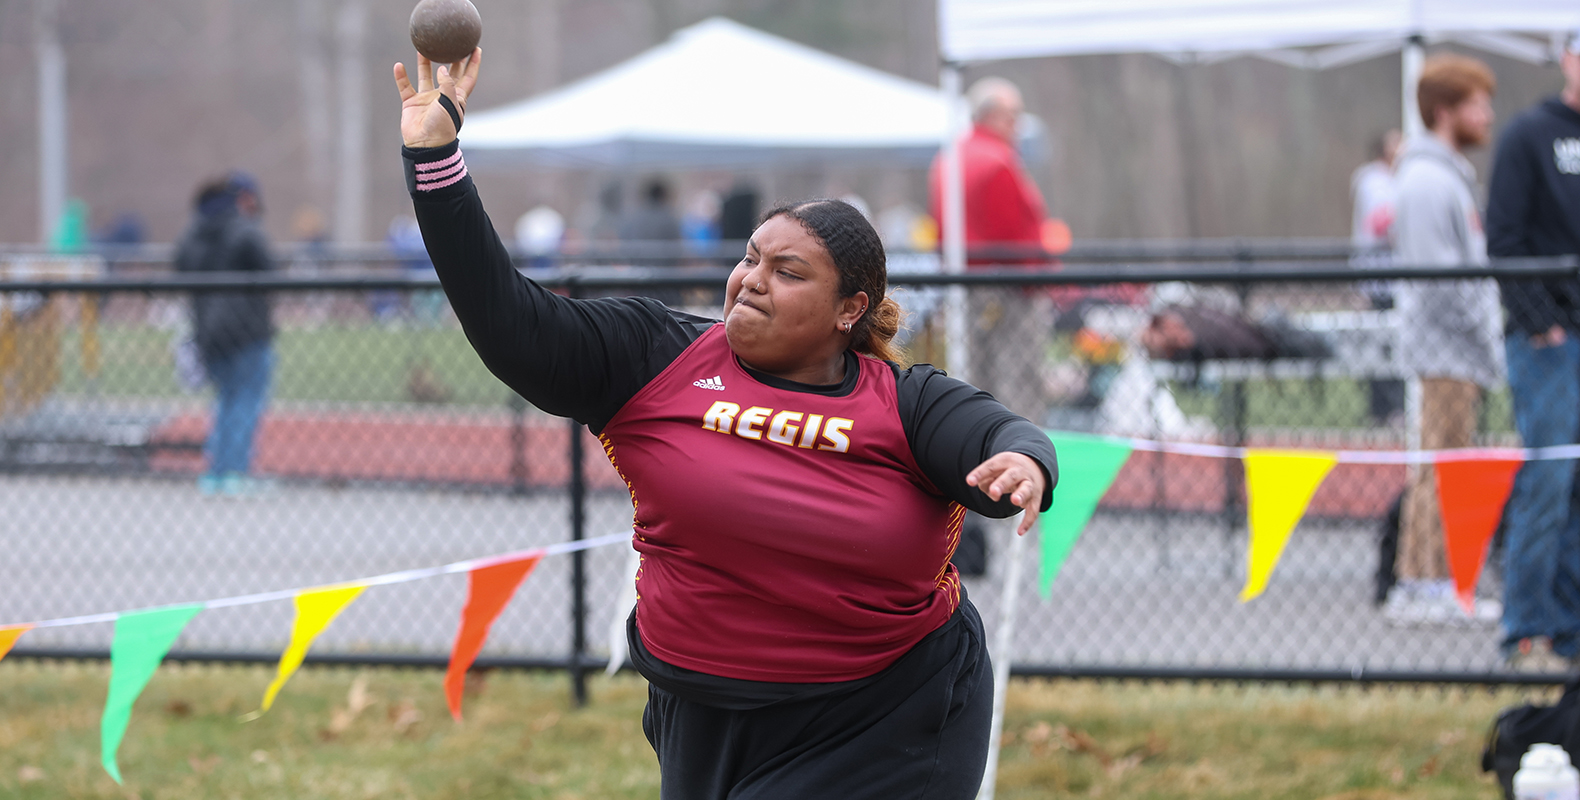 Women’s Track and Field Hosts Regis Spring Classic